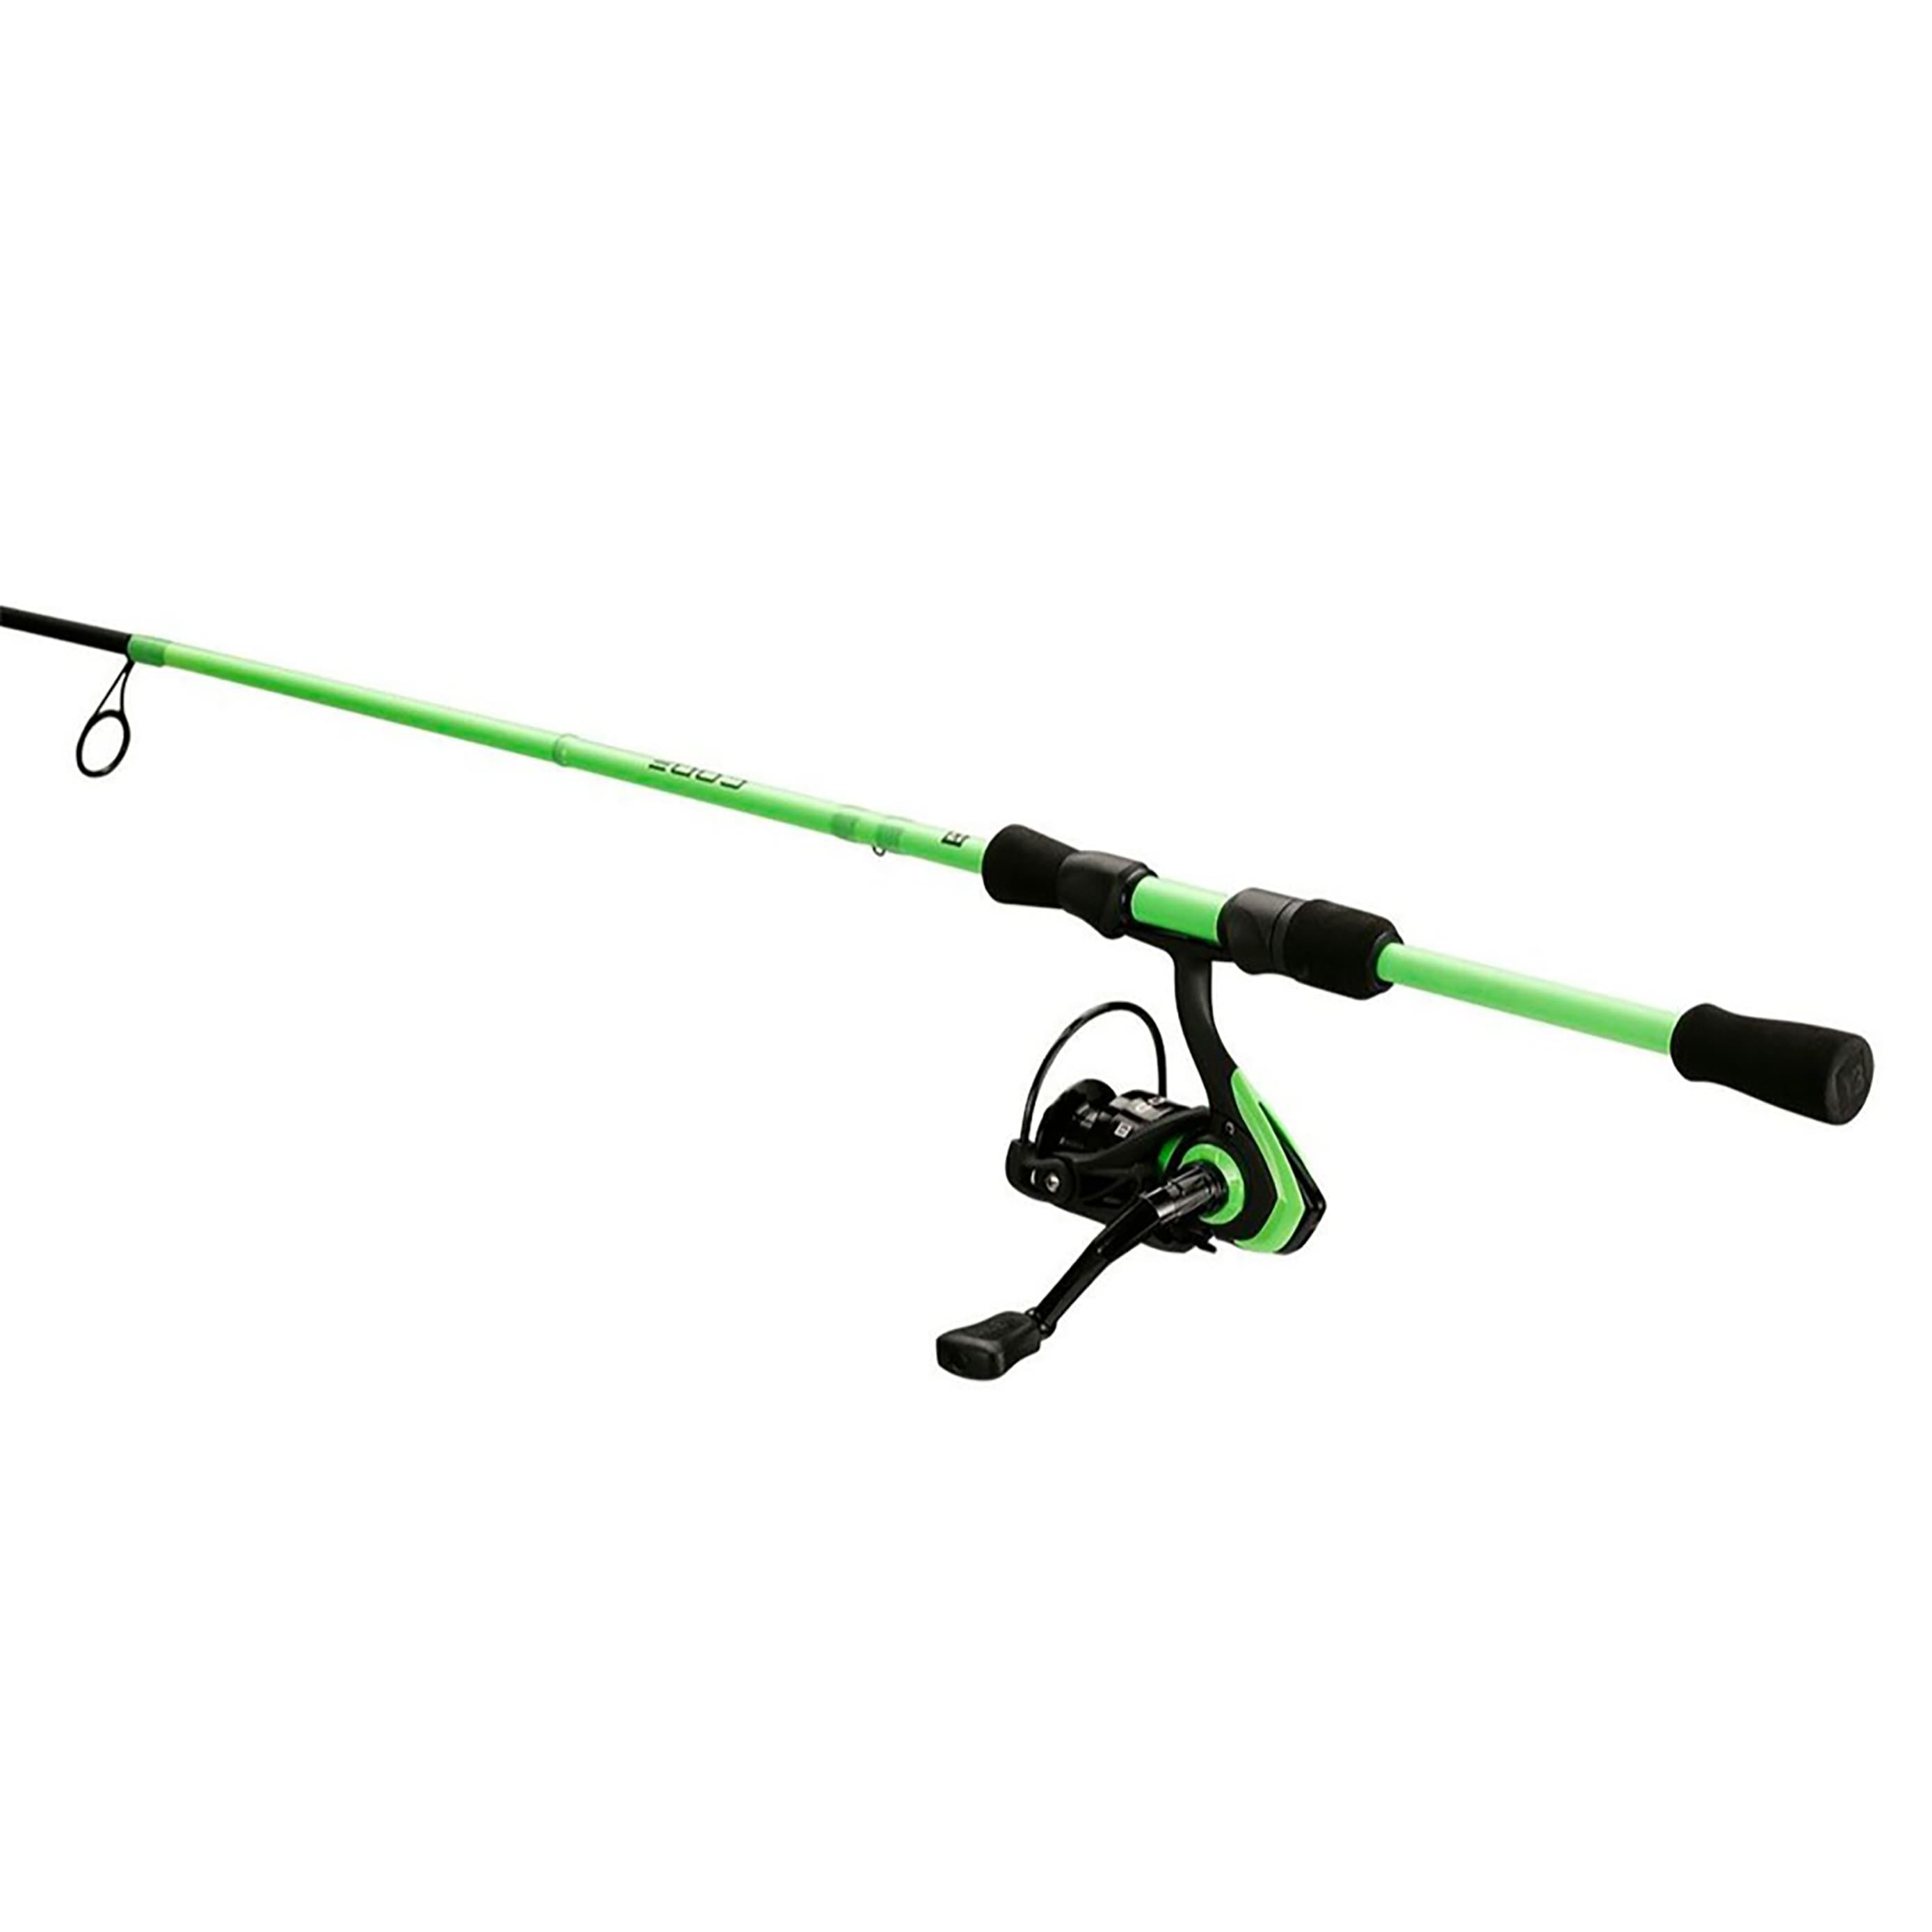 Premium Fishing Rod and Reel Combo - Smooth Retrieves, Soft Touch Knob,  High-Quality Construction in the Sports Equipment department at